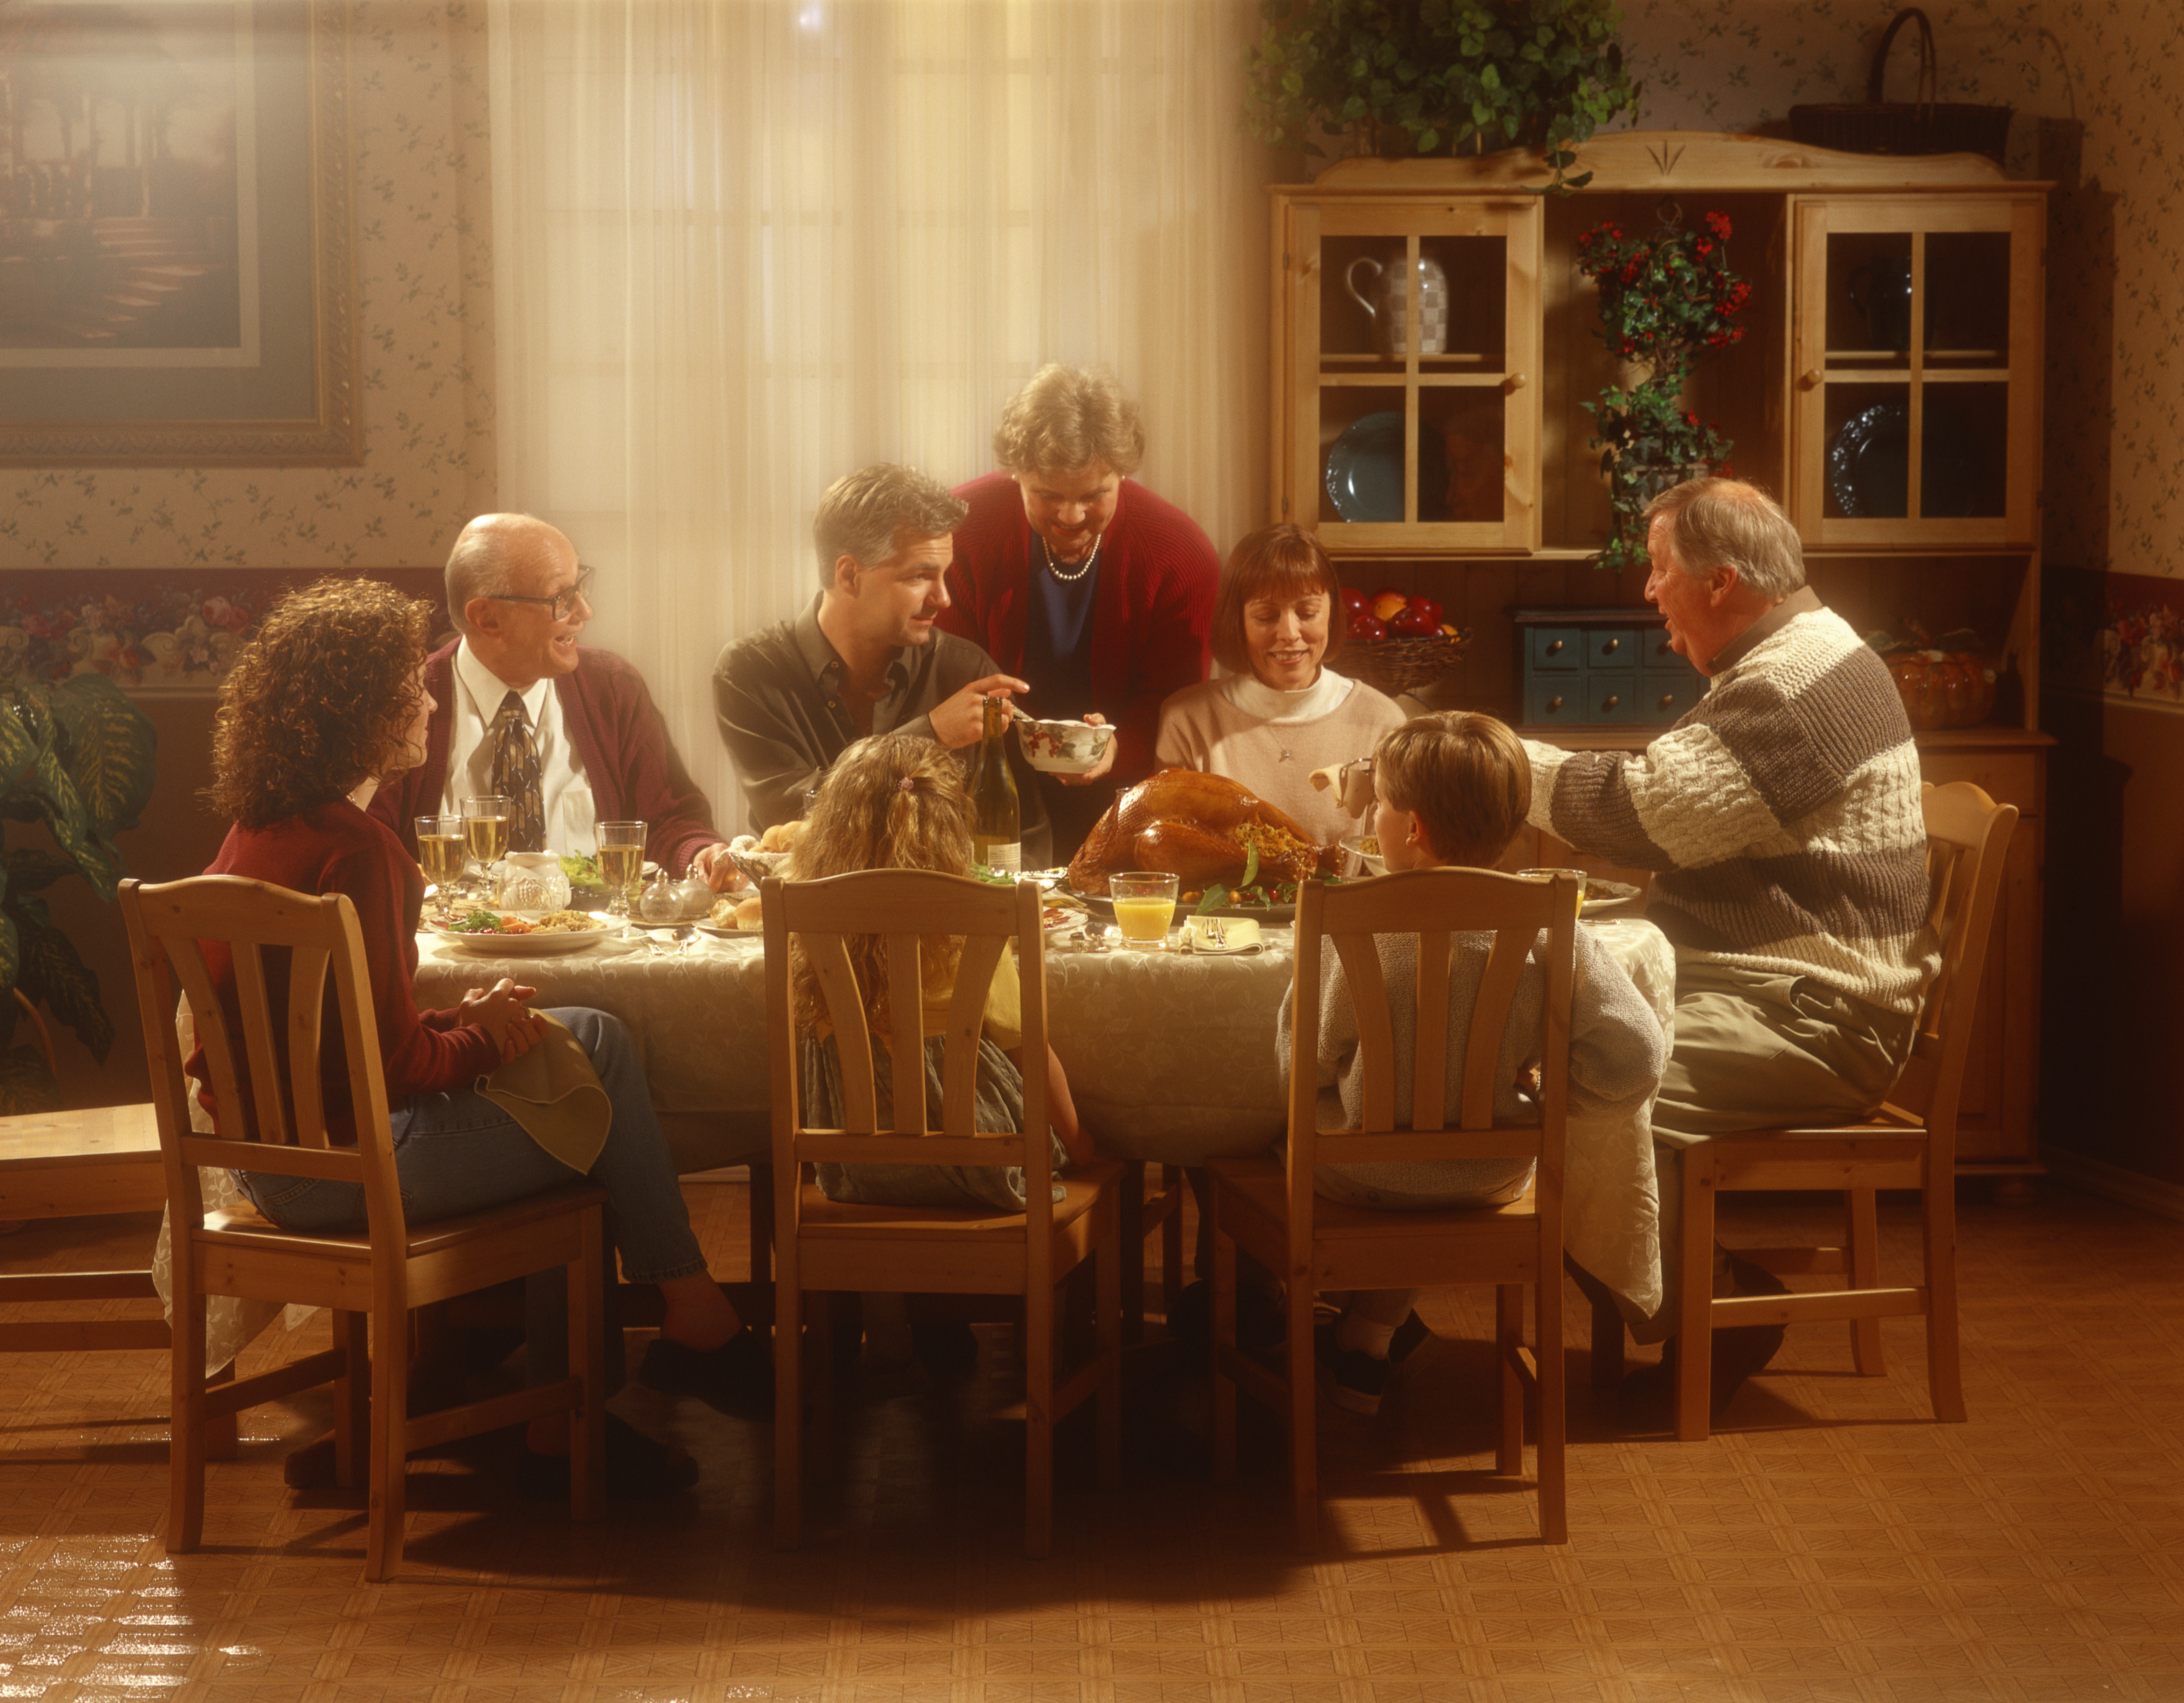 Family at table together | Source: Getty Images